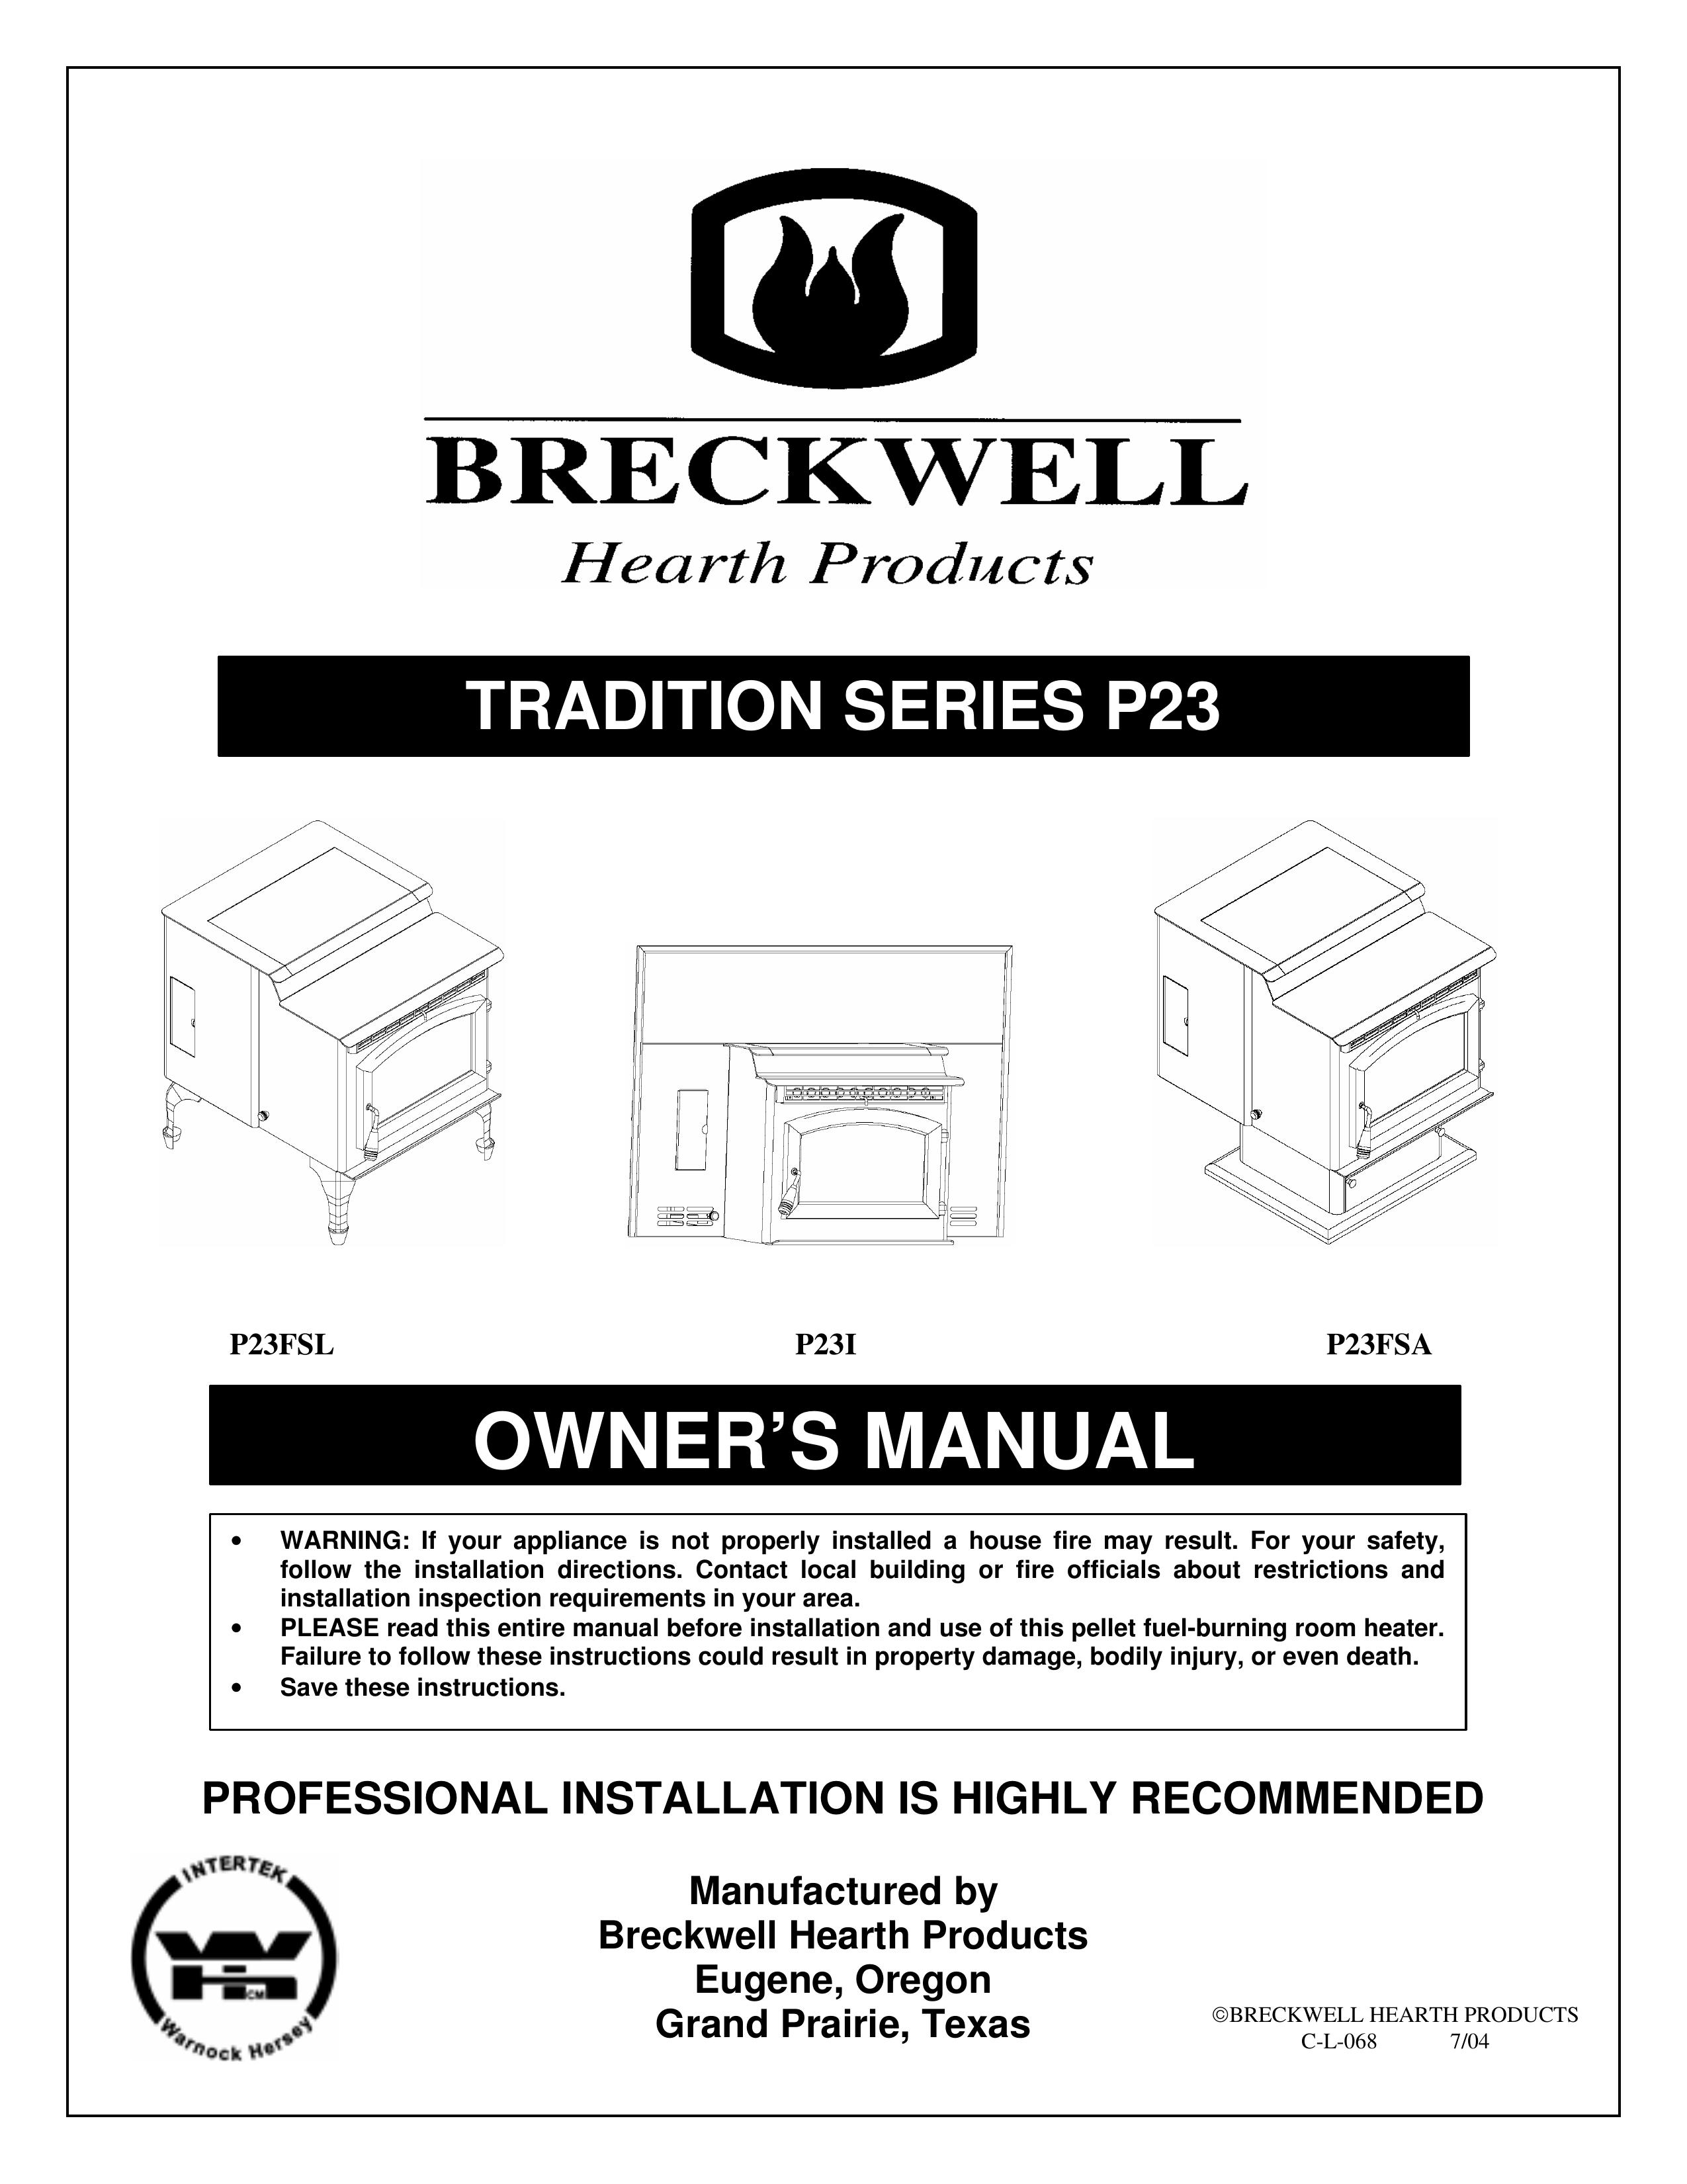 Breckwell P23FSA Fire Pit User Manual (Page 1)